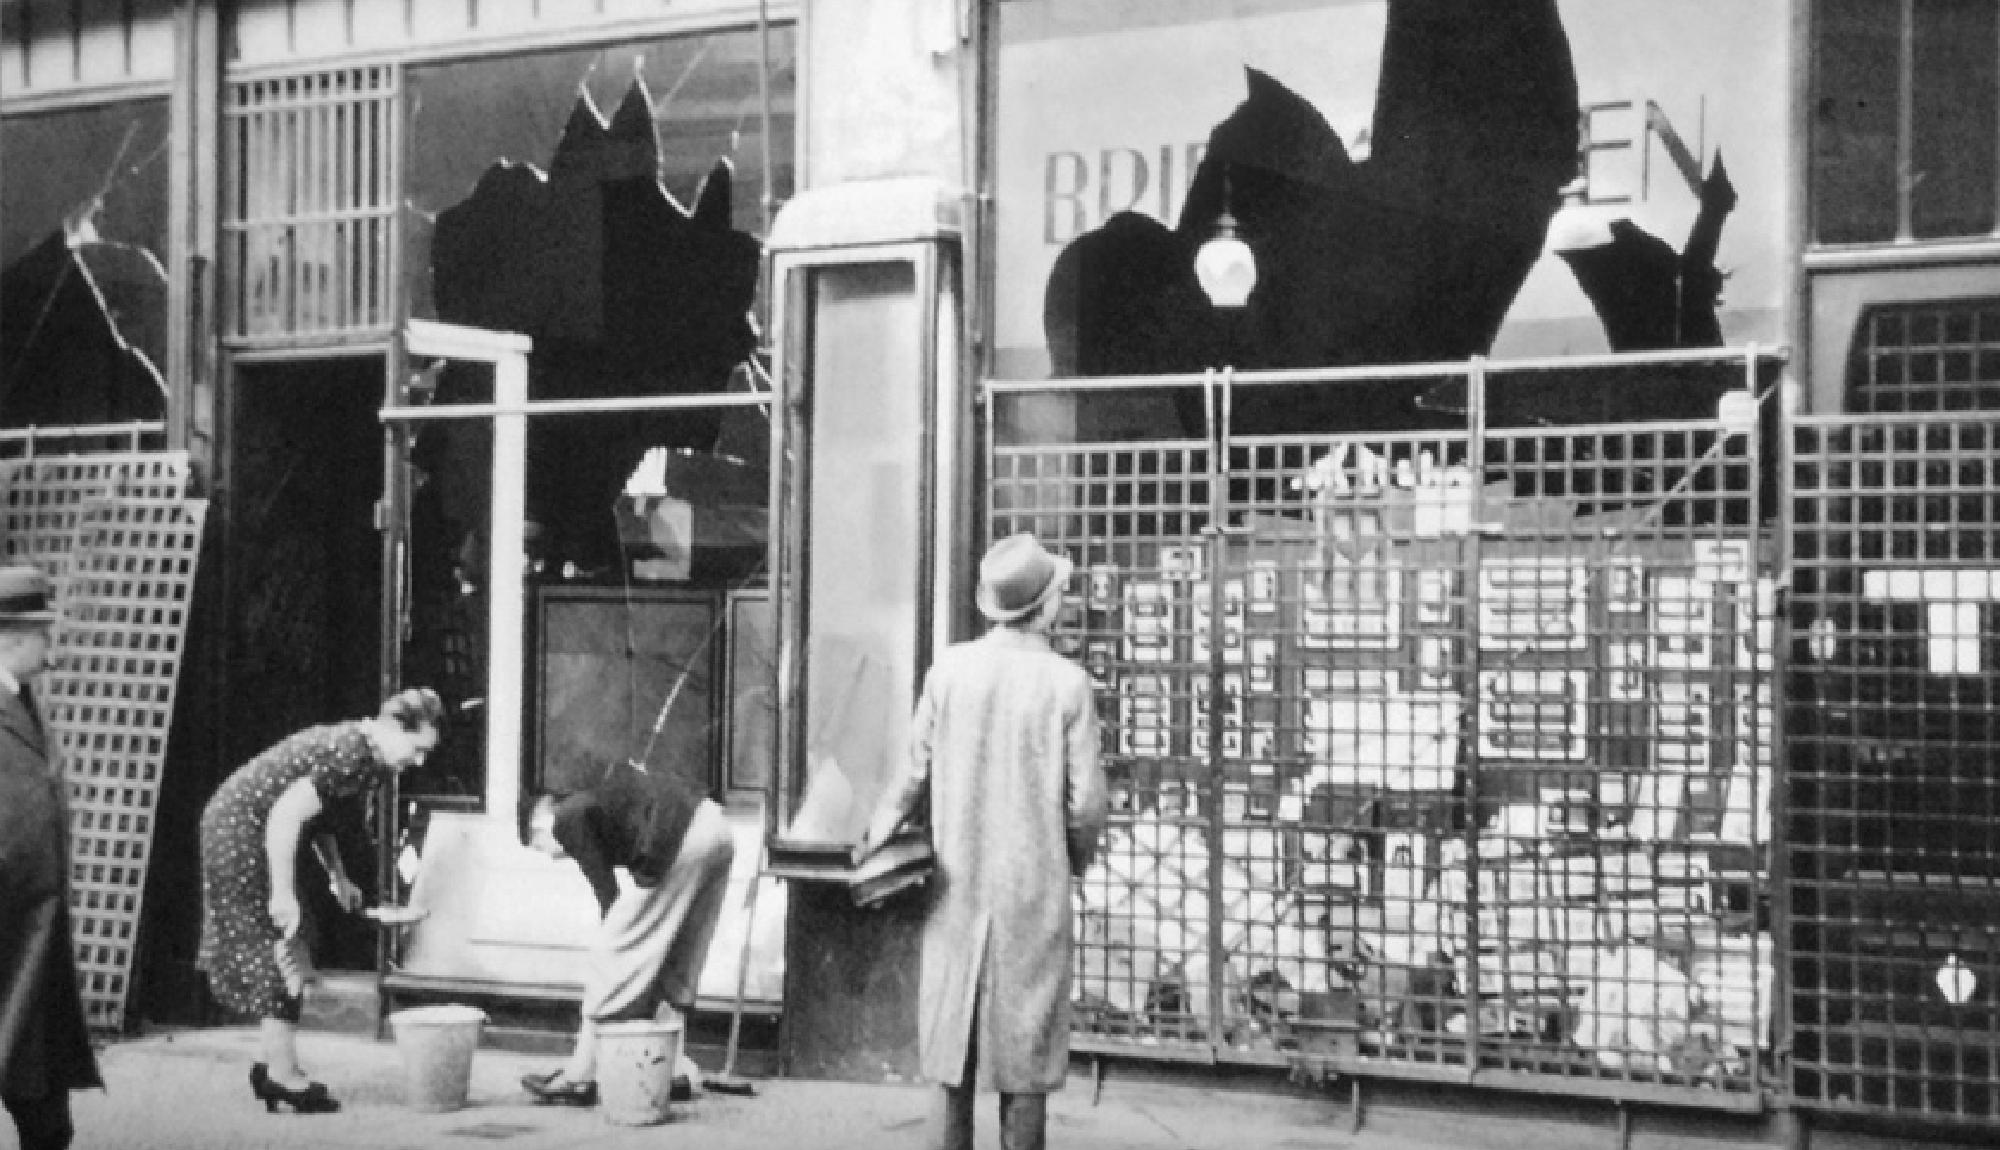 Historical photograph from Berlin, November 10th, 1938. Depicts the aftermath of the Kristallnacht. Store owners clean the pavement in front of shattered storefront windows.